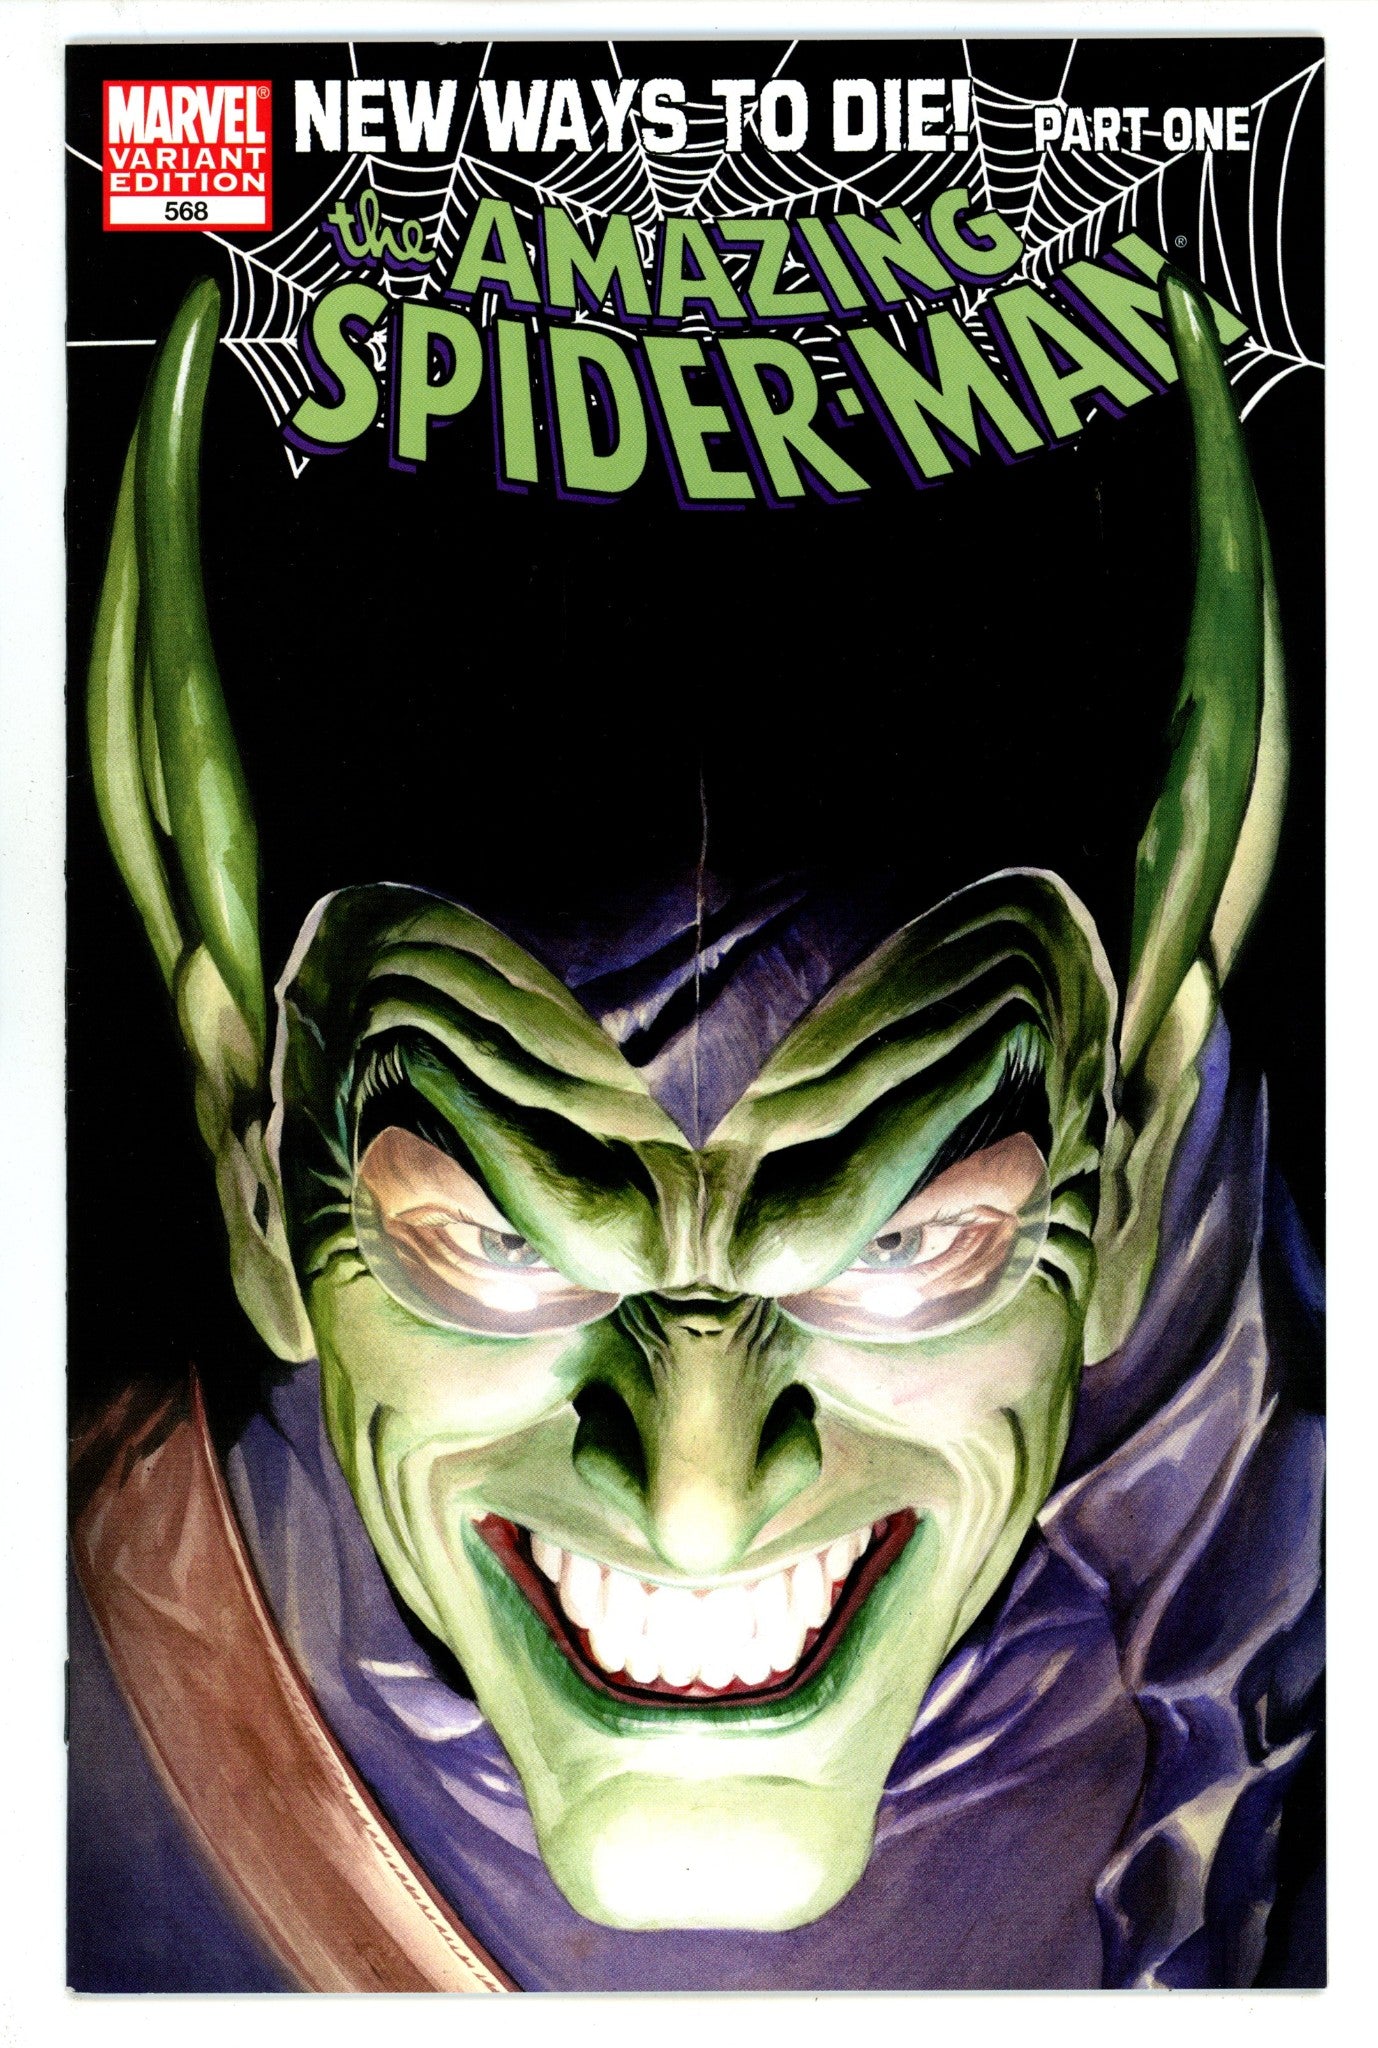 The Amazing Spider-Man Vol 2 568 VF (8.0) (2008) Ross Variant 